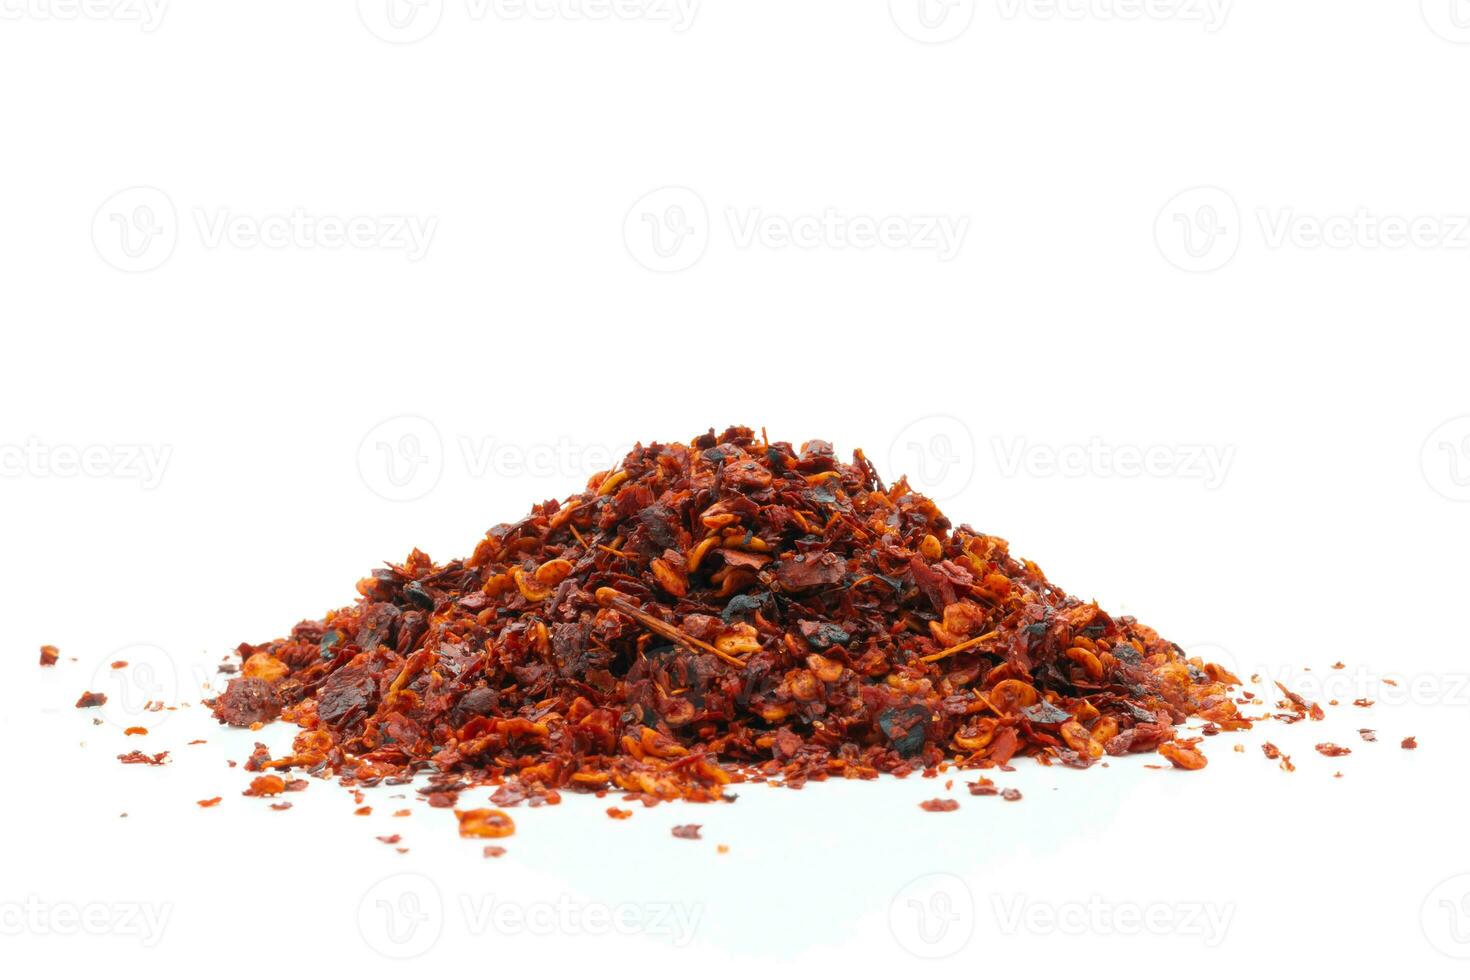 Dried chili meal on a white background photo